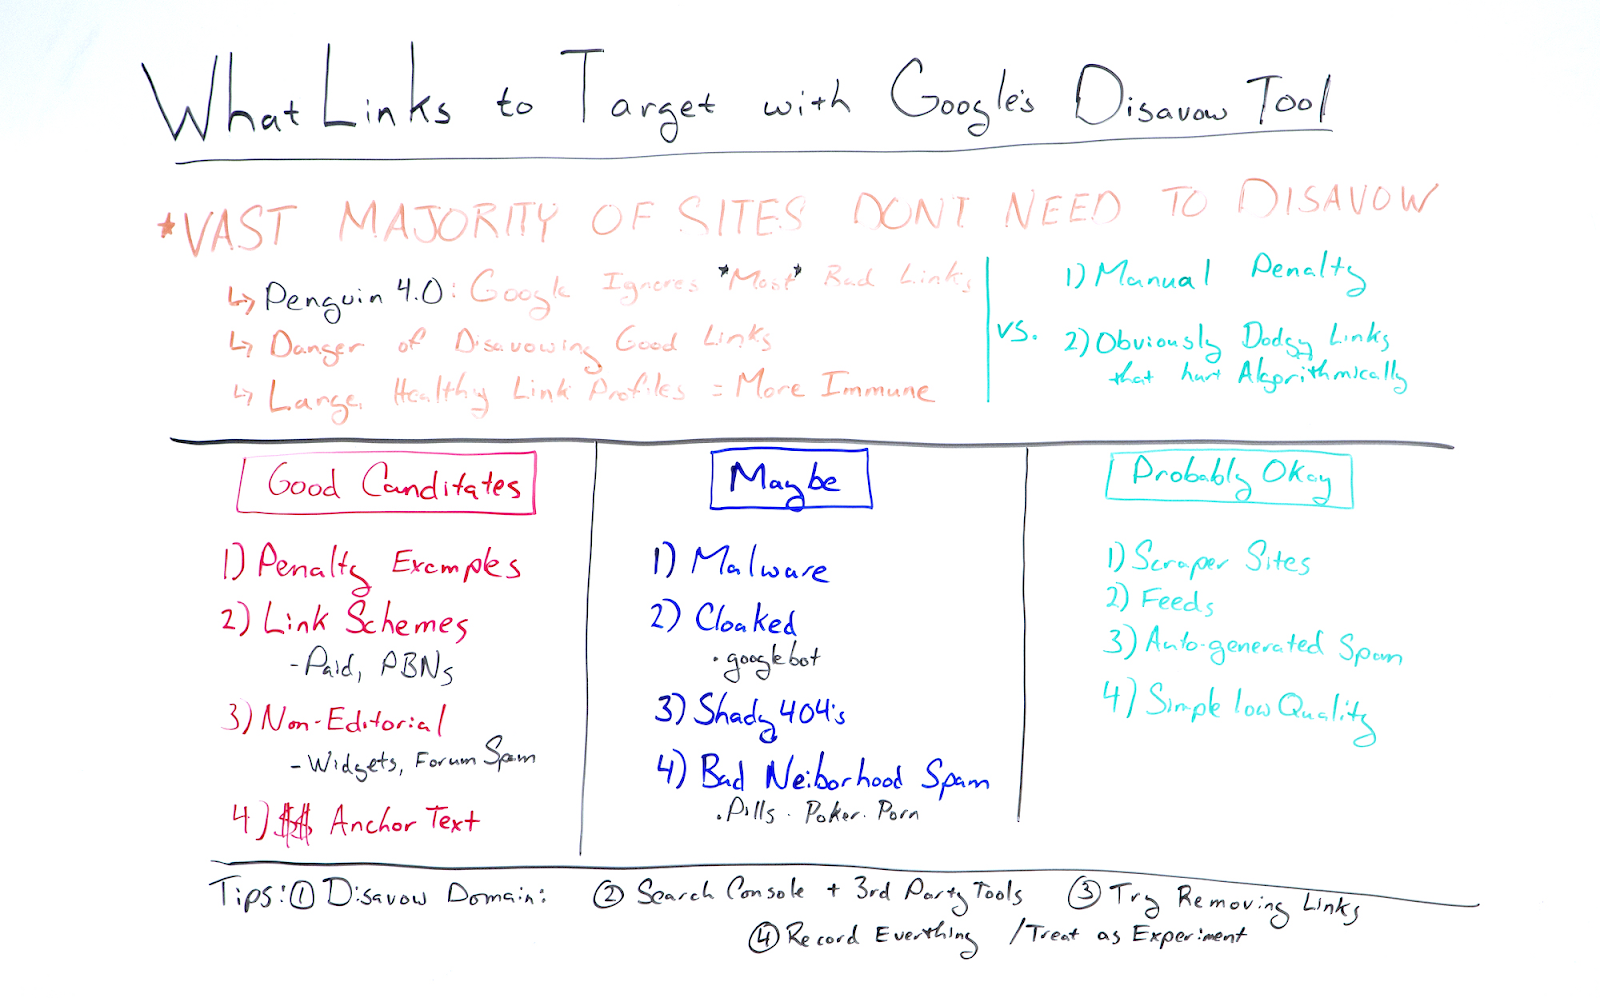 Writing on whiteboard explaining which kinds of links should be targeted with Google's disavow tool.